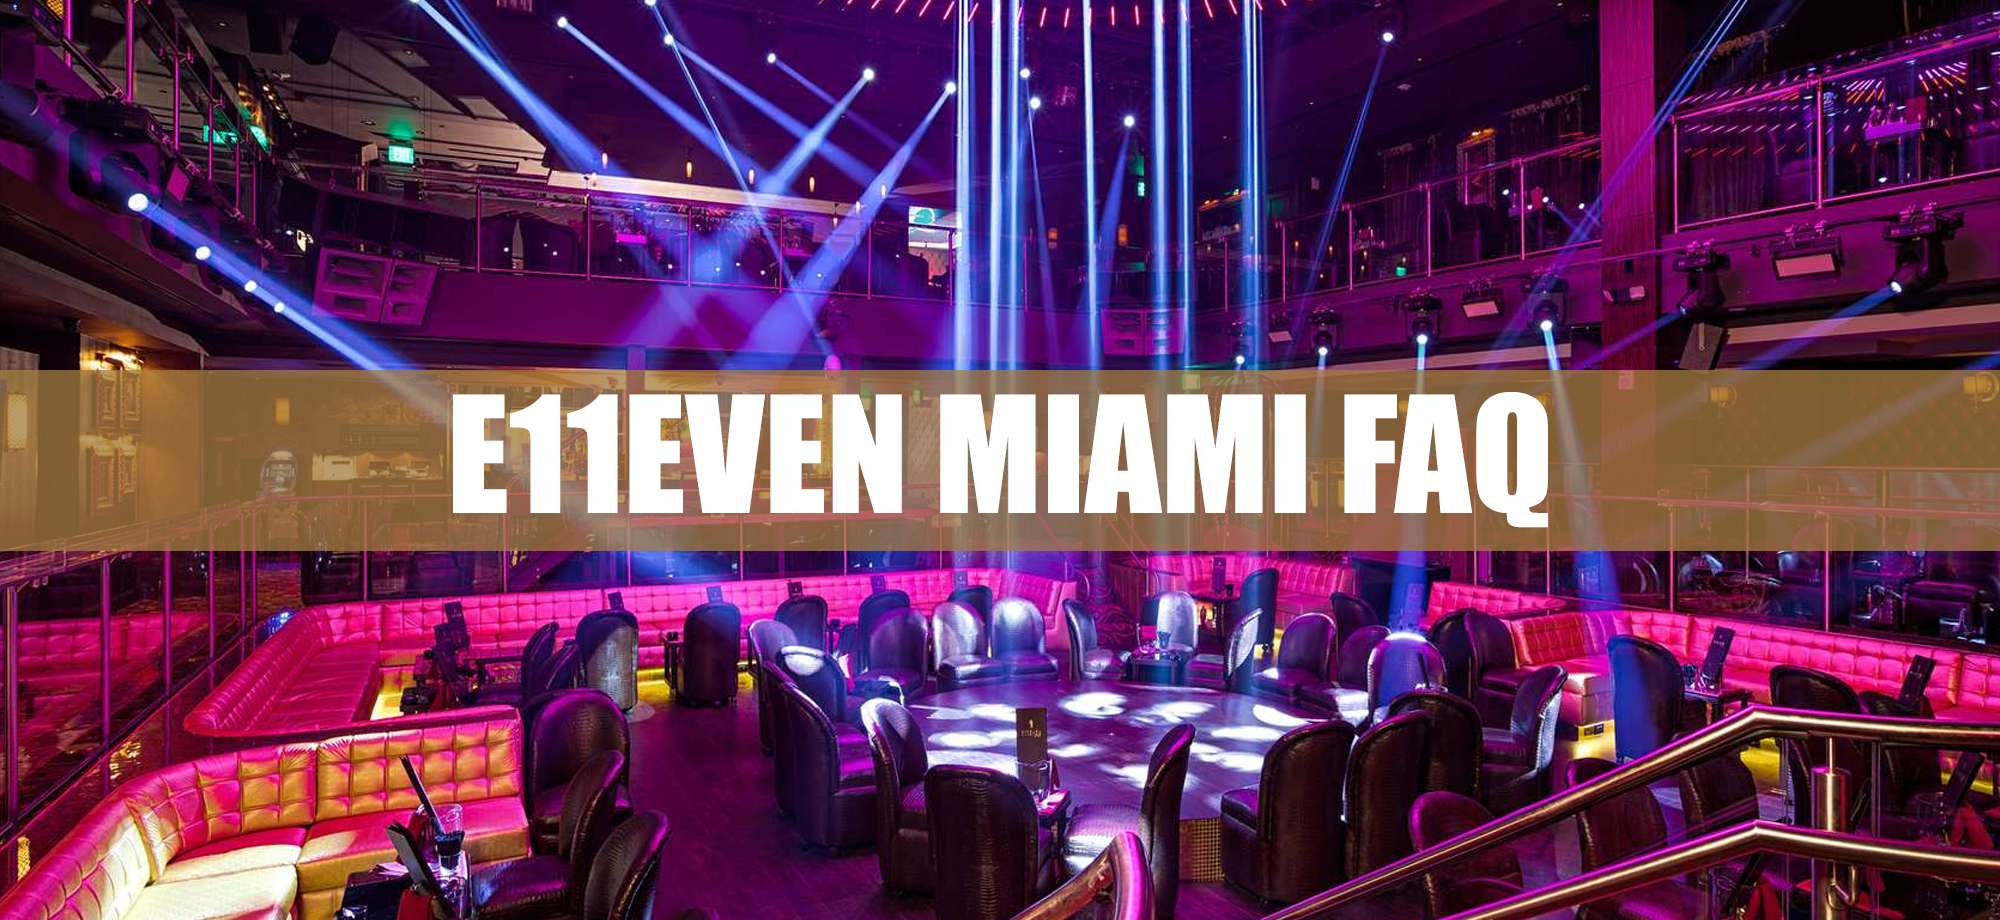 Club Space Miami Table Prices & Bottle Service - Club Bookers